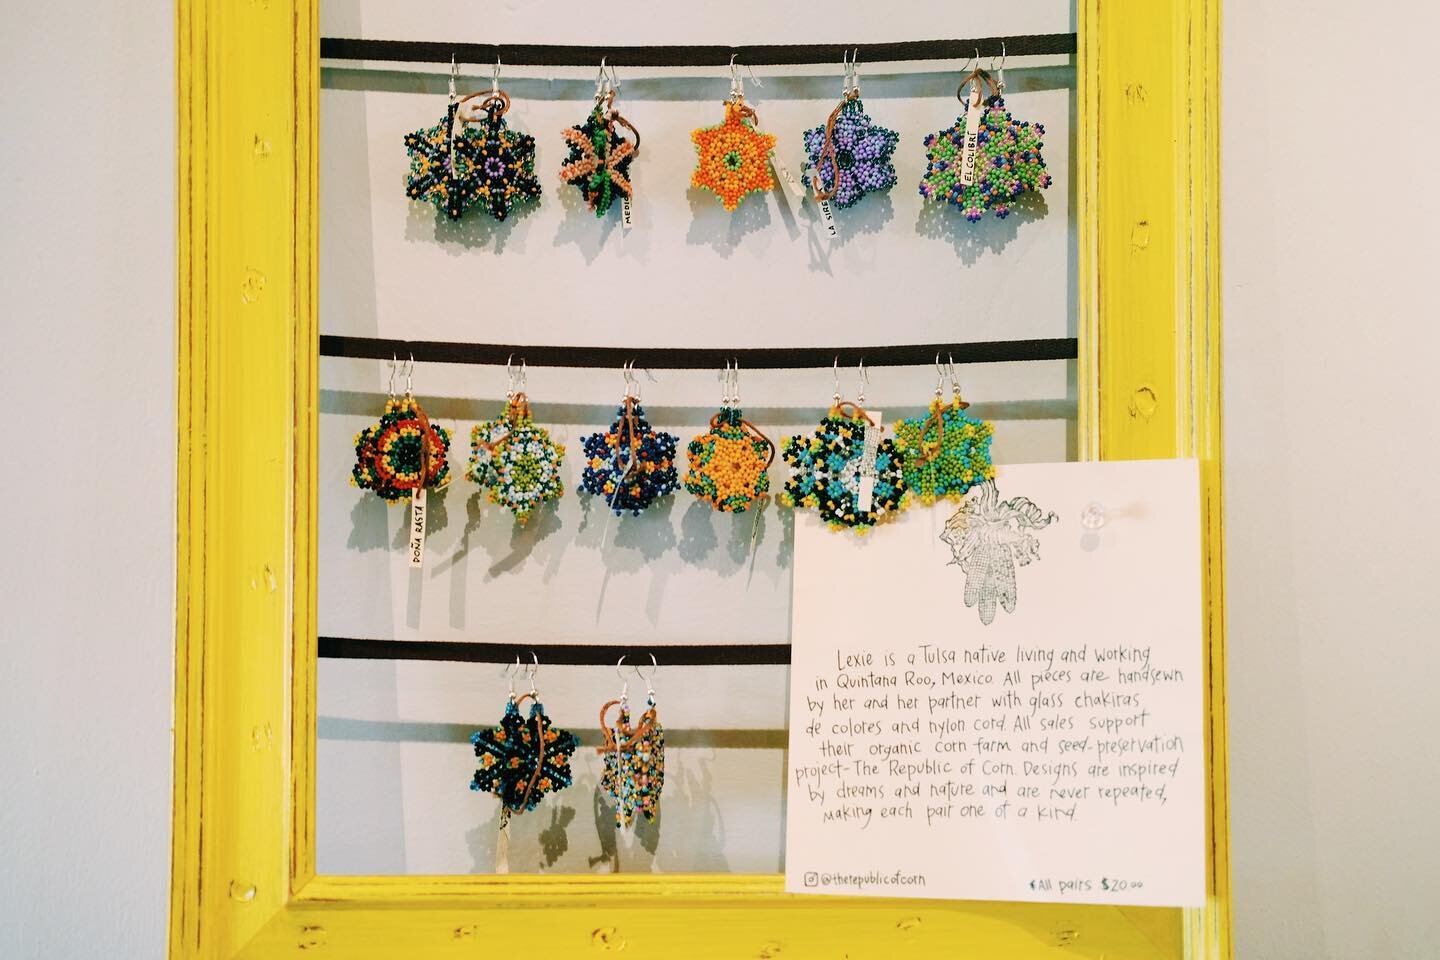 New beaded earrings on our walls, created by Lexie ✨ The proceeds from each sale benefit The Republic of Corn, a non-profit agricultural project located in the Yucat&aacute;n peninsula ✨🌿 @therepublicofcorn